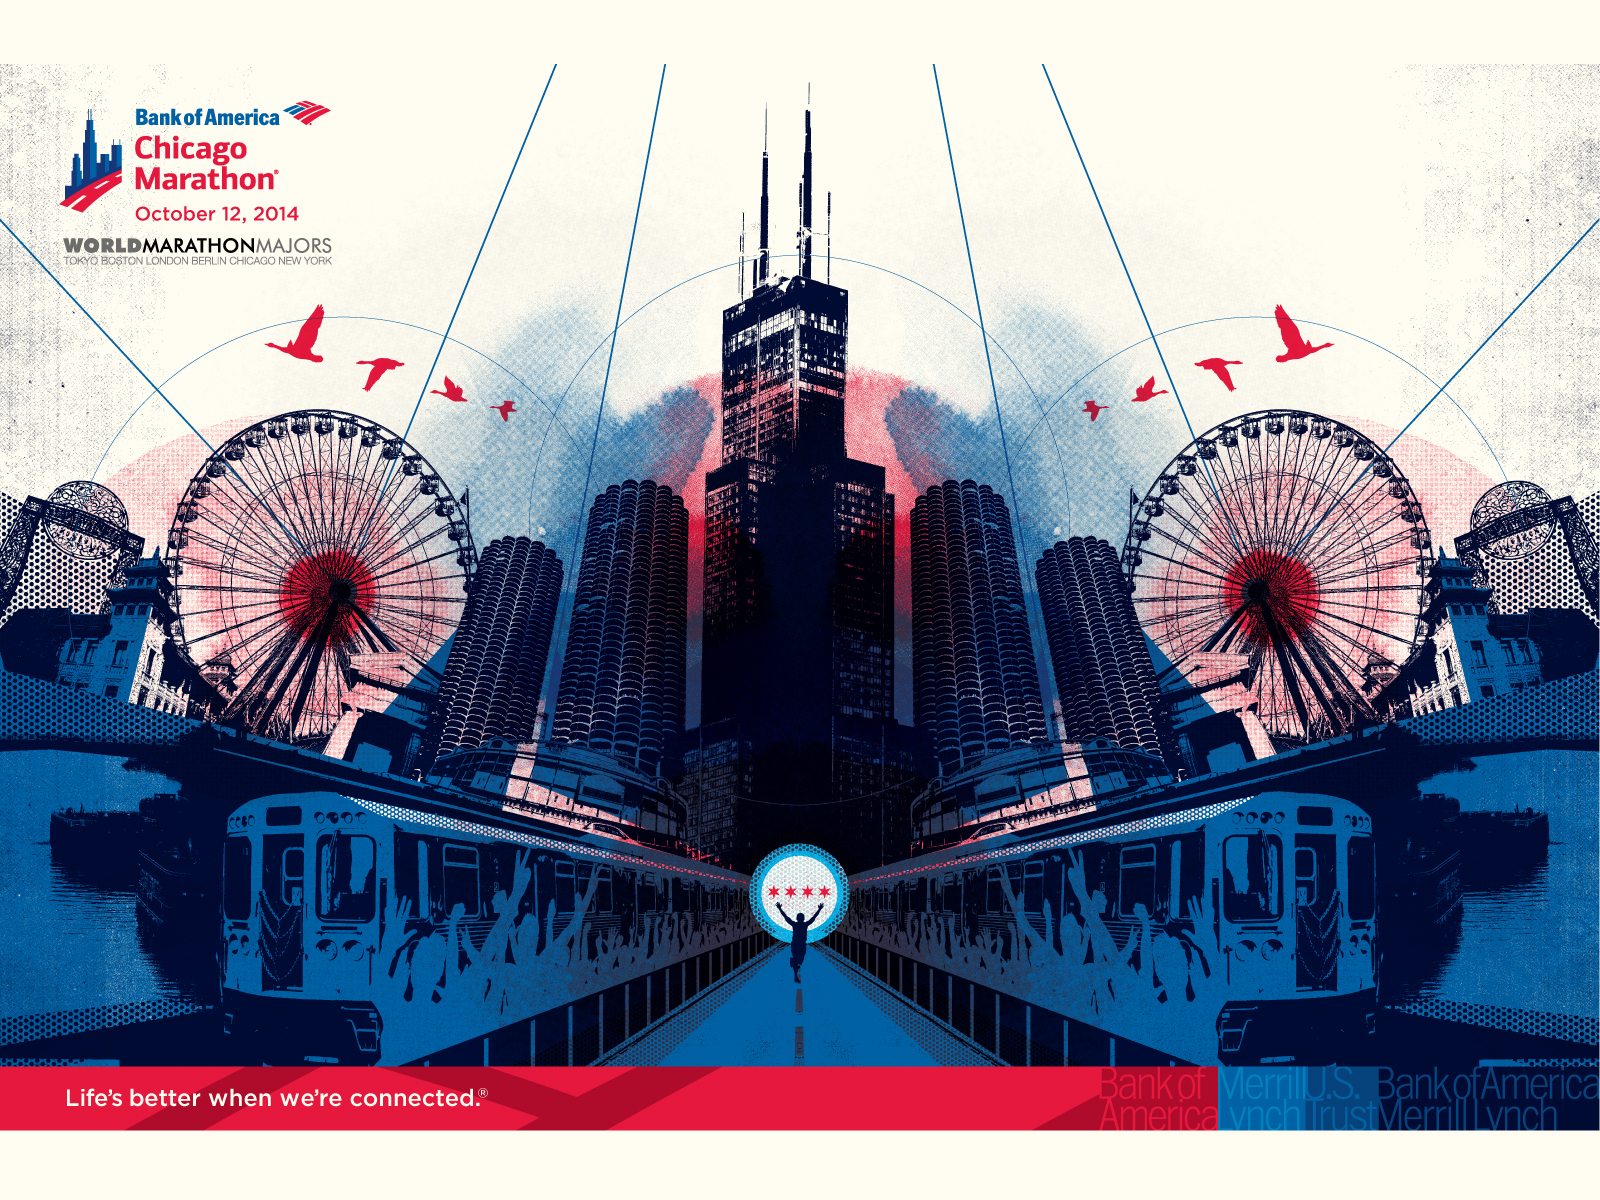 Bank of America Chicago Marathon Poster & Map by Billy Baumann for